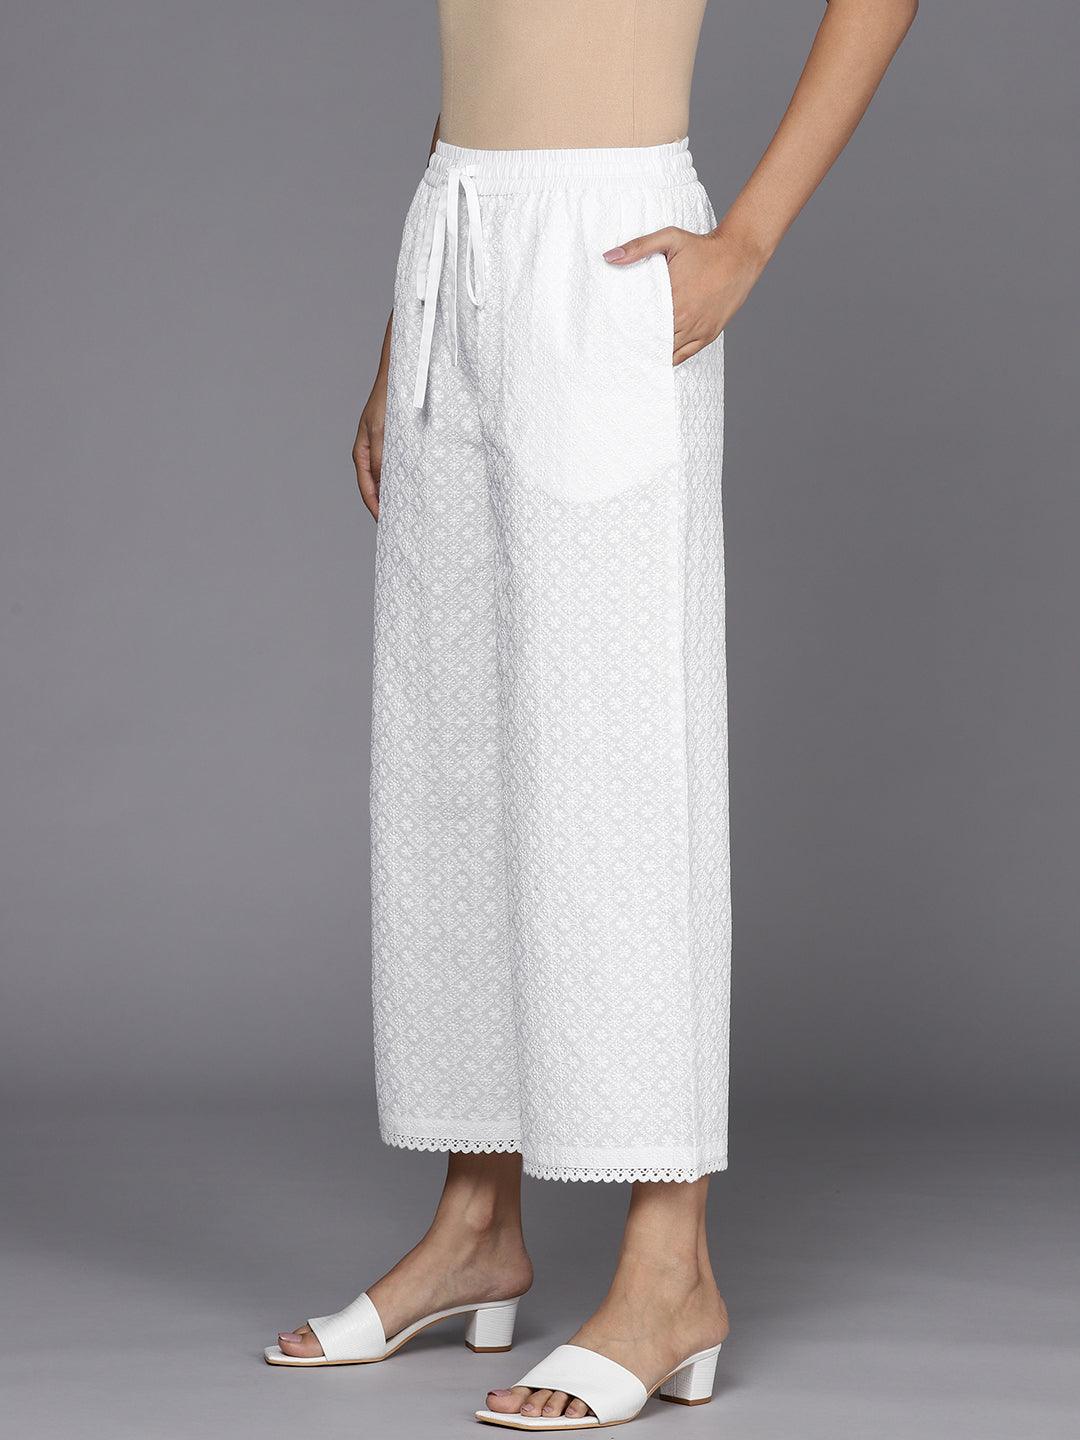 Off White Embroidered Cotton Palazzos - Libas